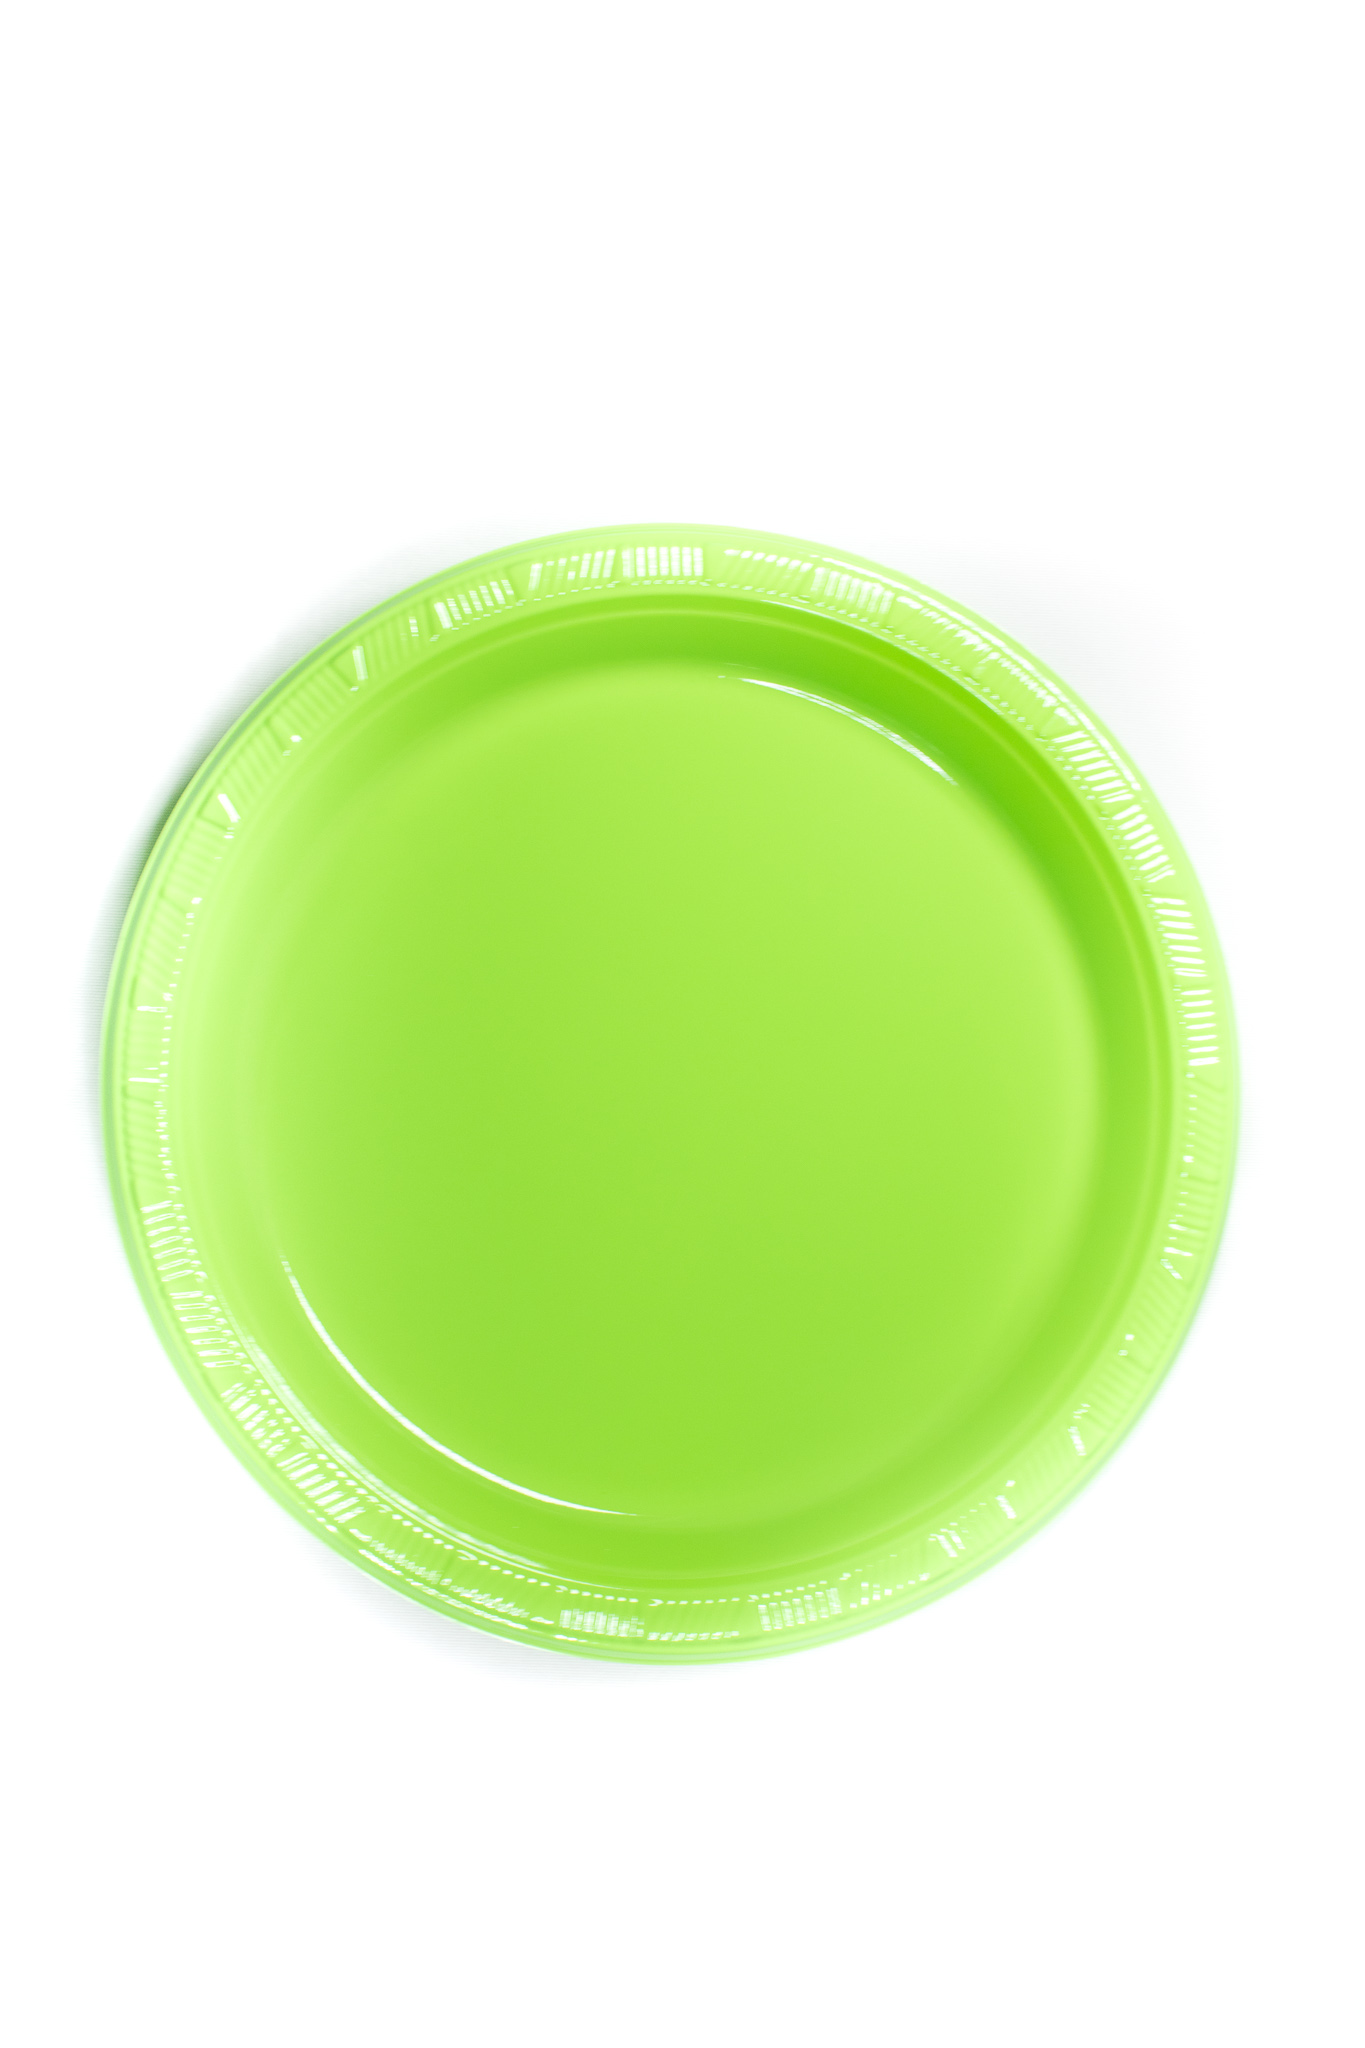 Cake Plate (Plastic) 7in 12ct-Lime Green 8.5 G